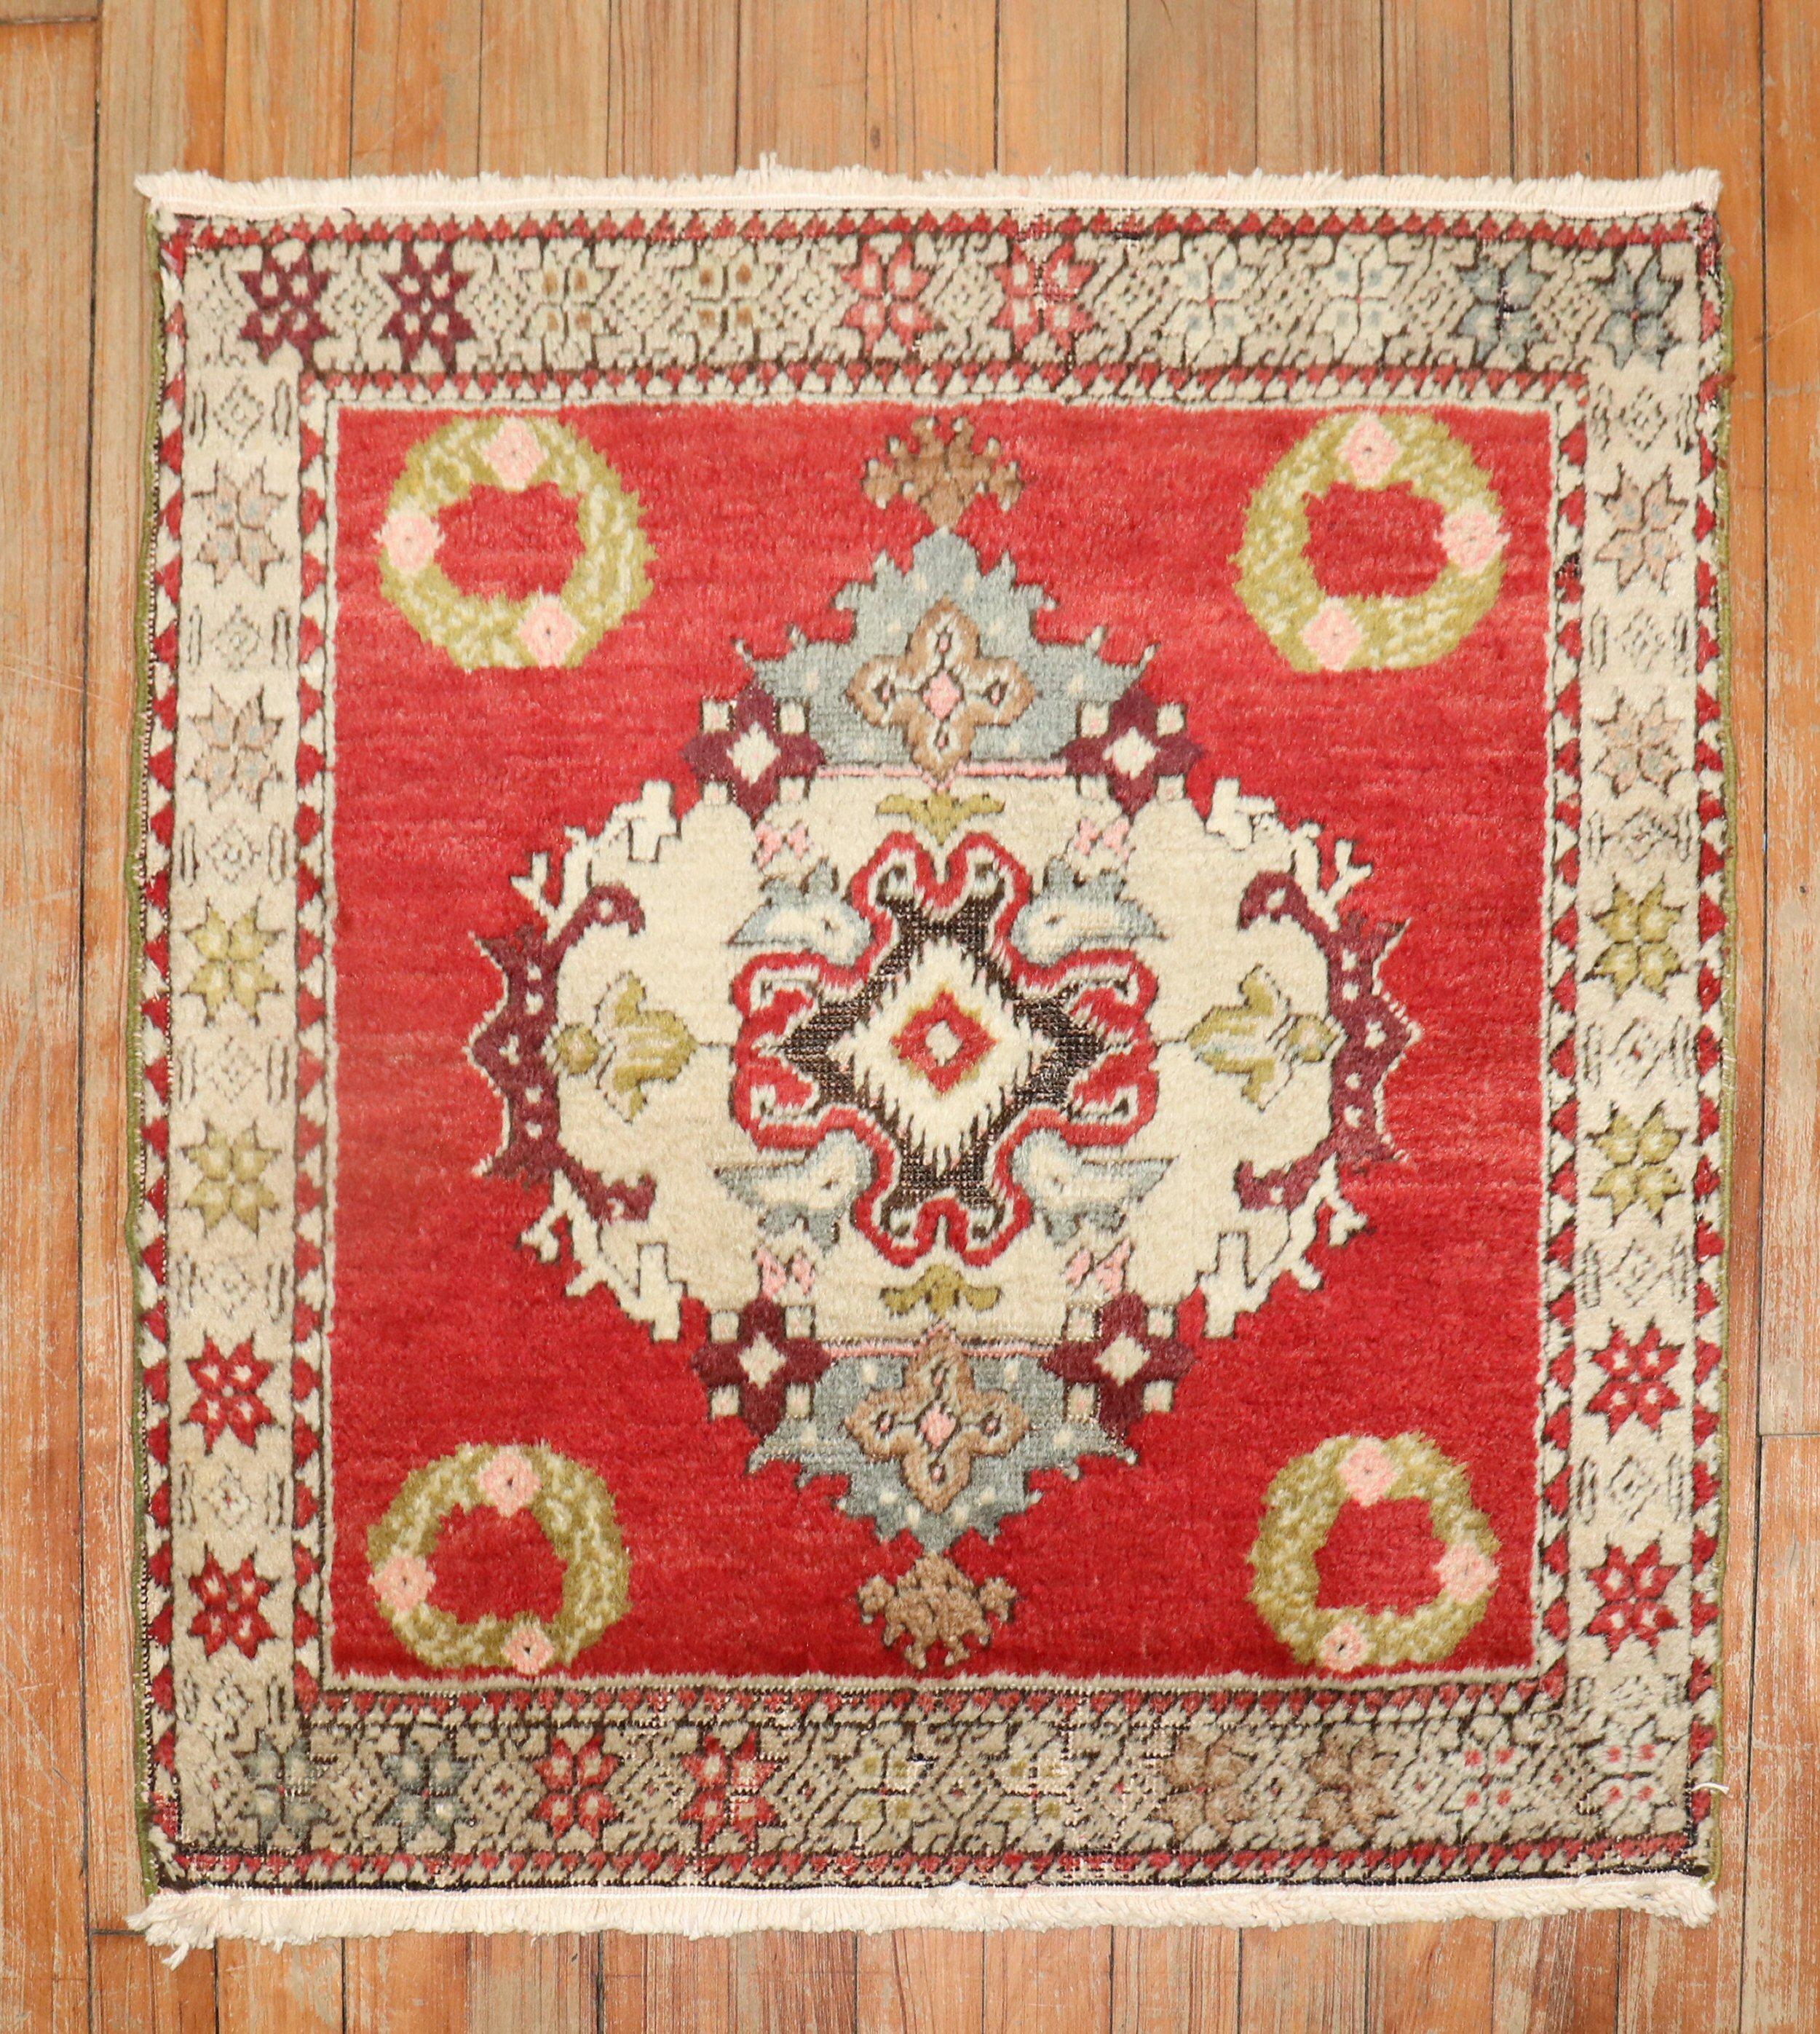 Mid-20th-century Turkish square Rug in red

Measures: 2'4